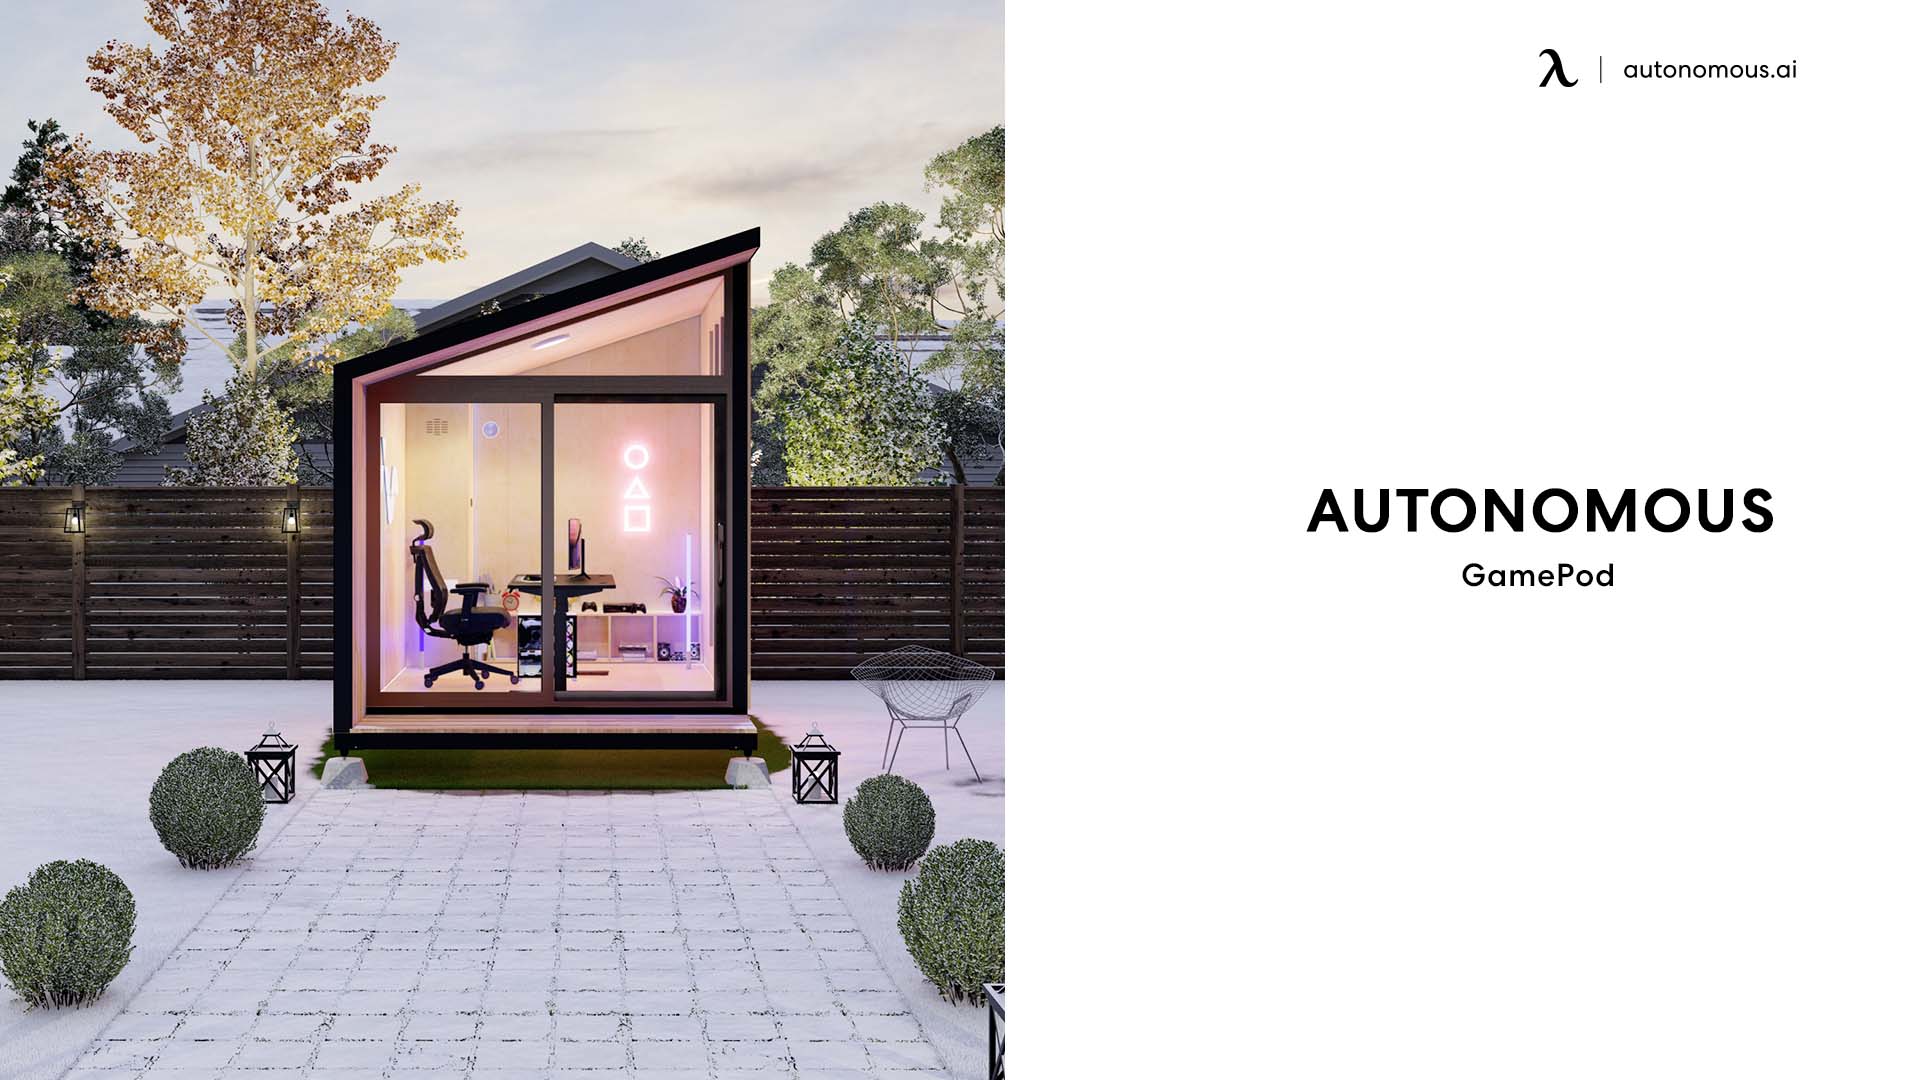 Autonomous GamePod outdoor gaming shed